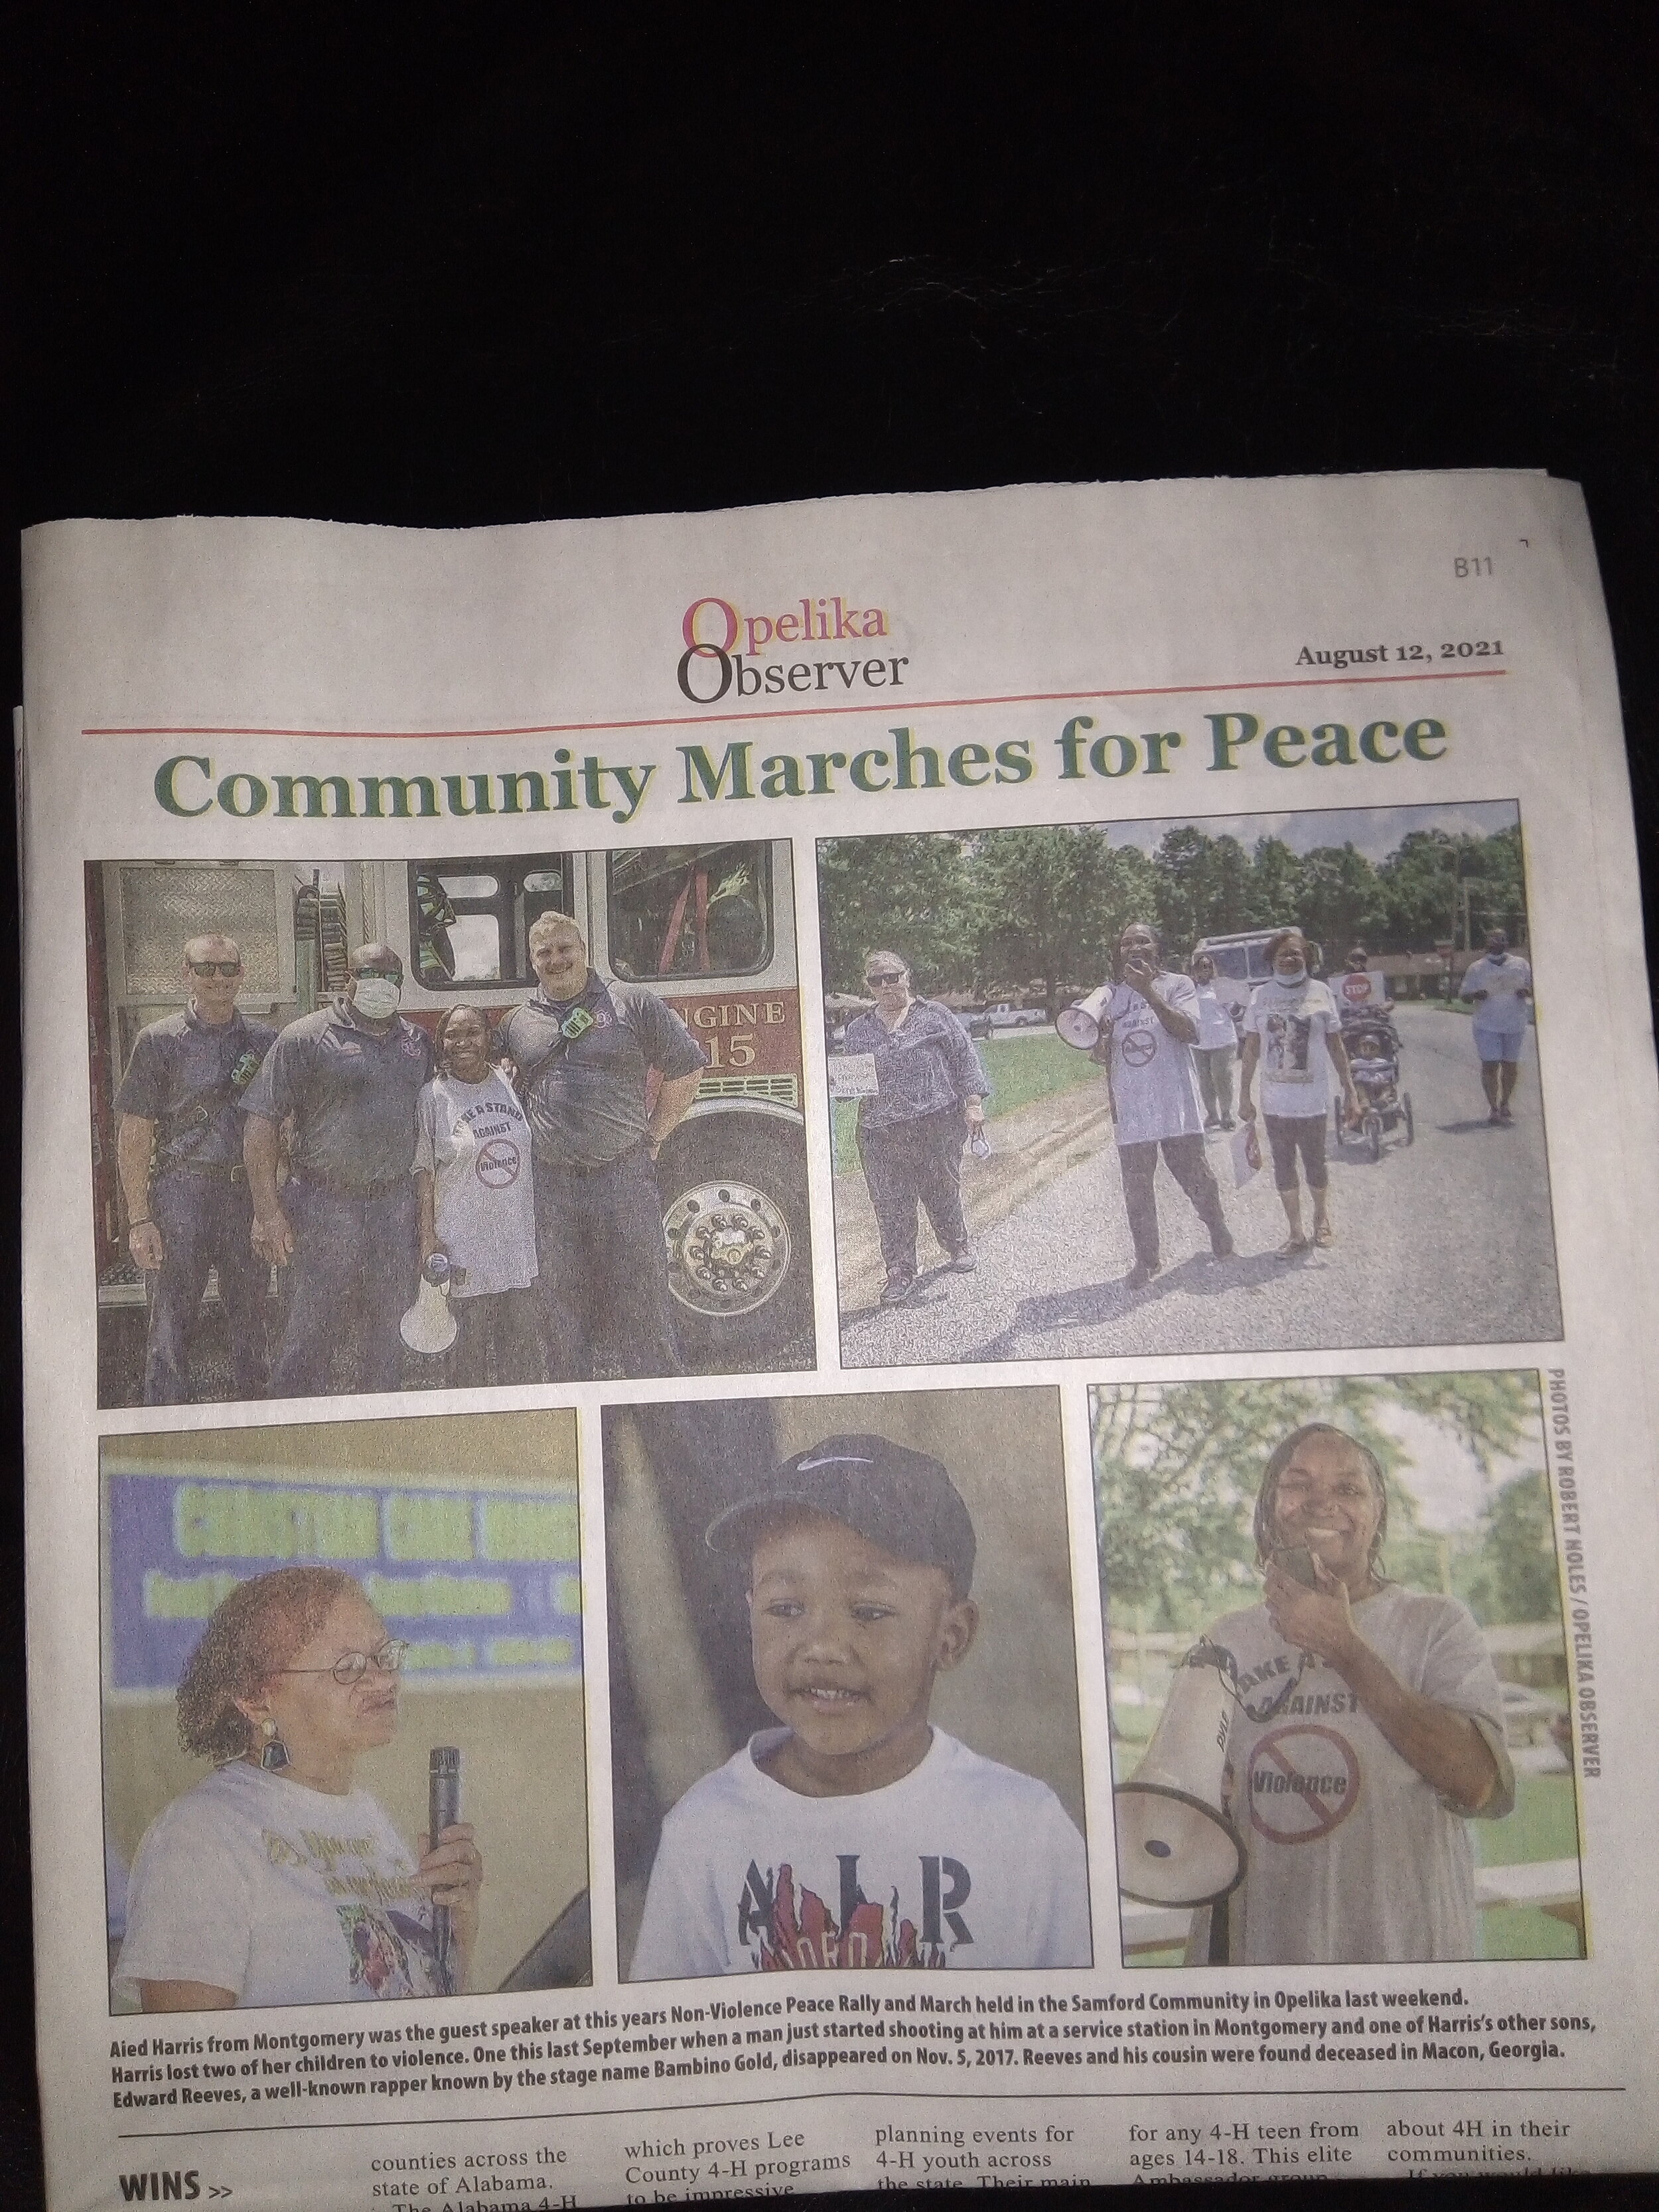  Pastor Carolyn Morton and SAMFORD COMMUNlTY OUTREACH NONVIOLENCE GROUP held their 6th ANNUAL Nonviolence Peace March and Rally Against Violence and Gun Violence in Opelika, AL, on August 7, 2021. 